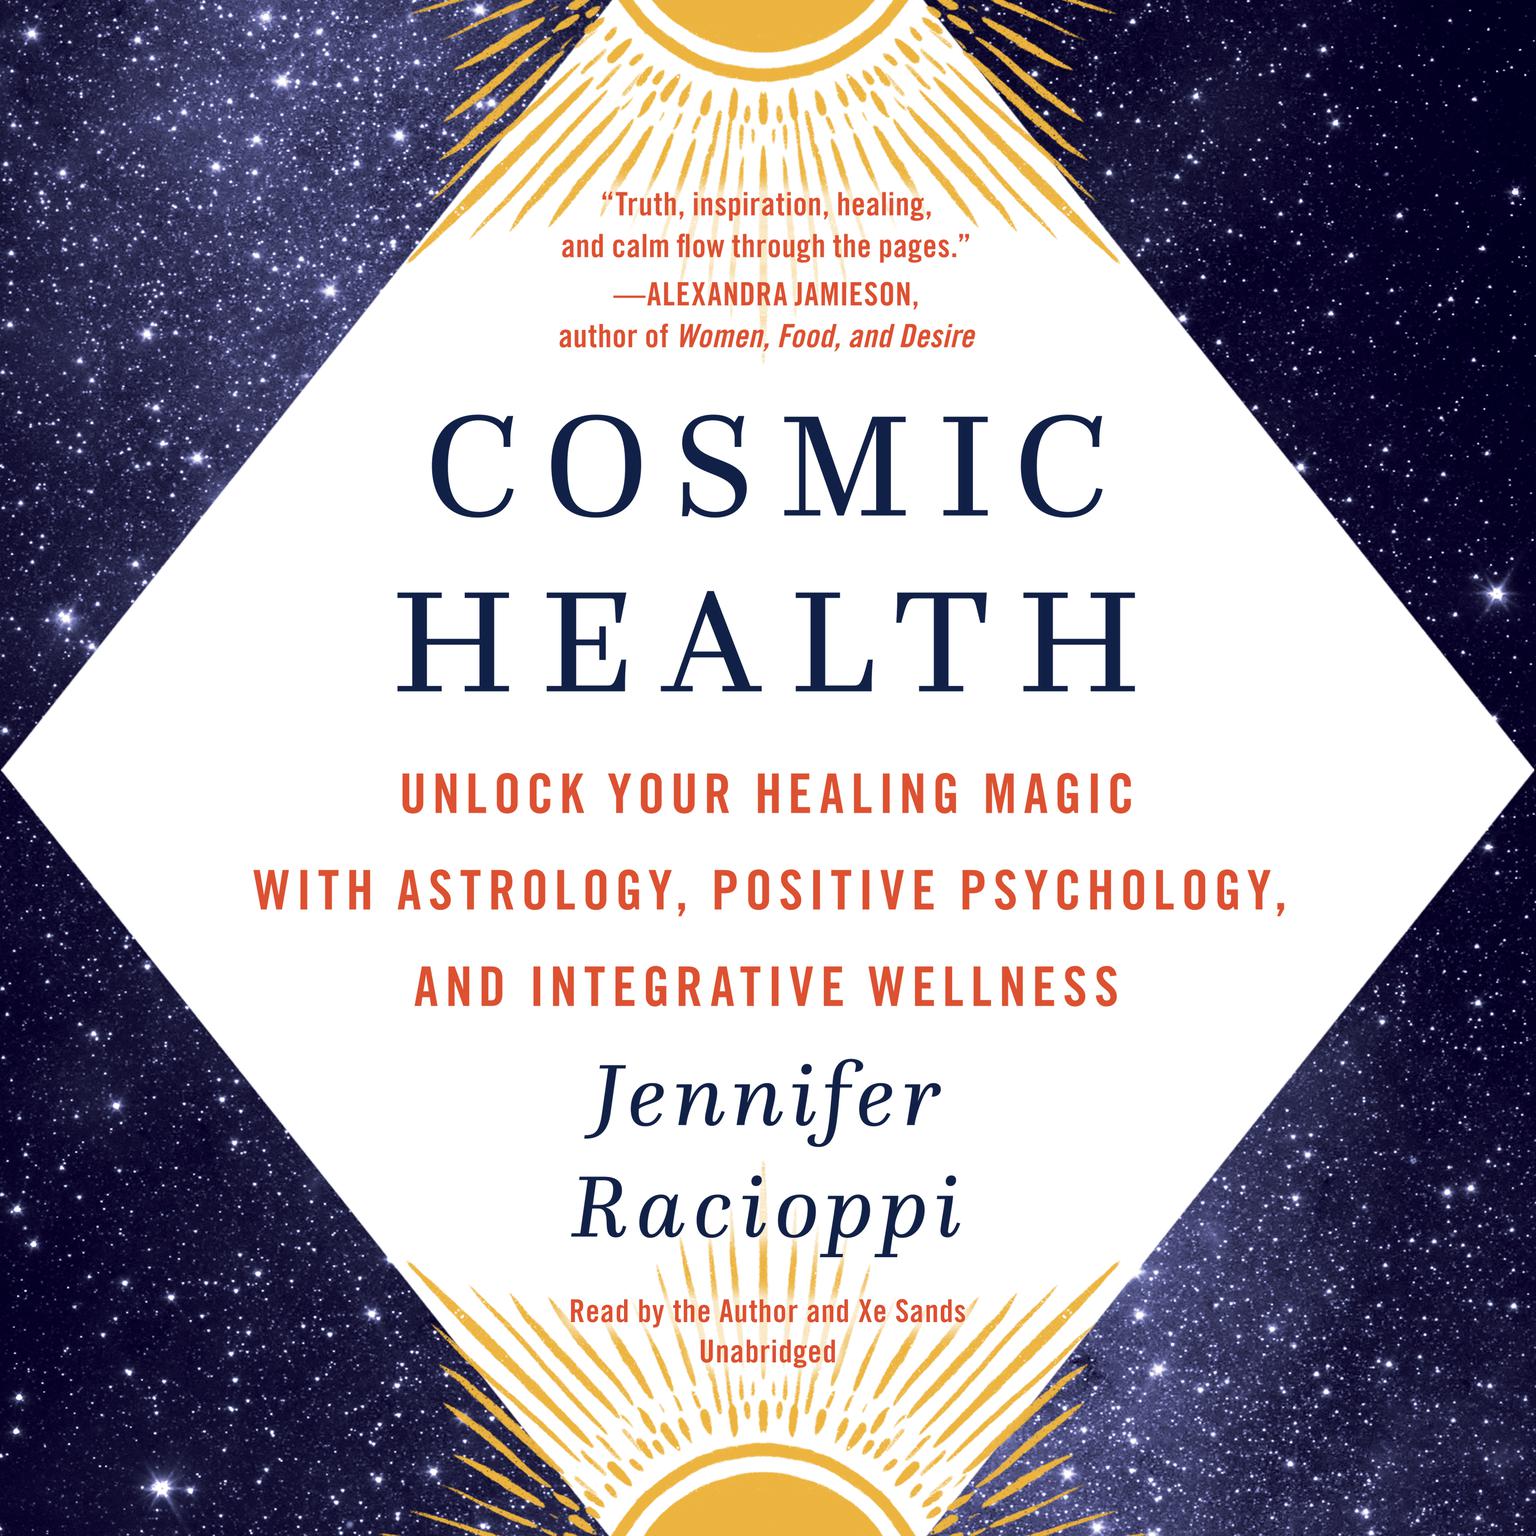 Cosmic Health: Unlock Your Healing Magic with Astrology, Positive Psychology, and Integrative Wellness Audiobook, by Jennifer Racioppi